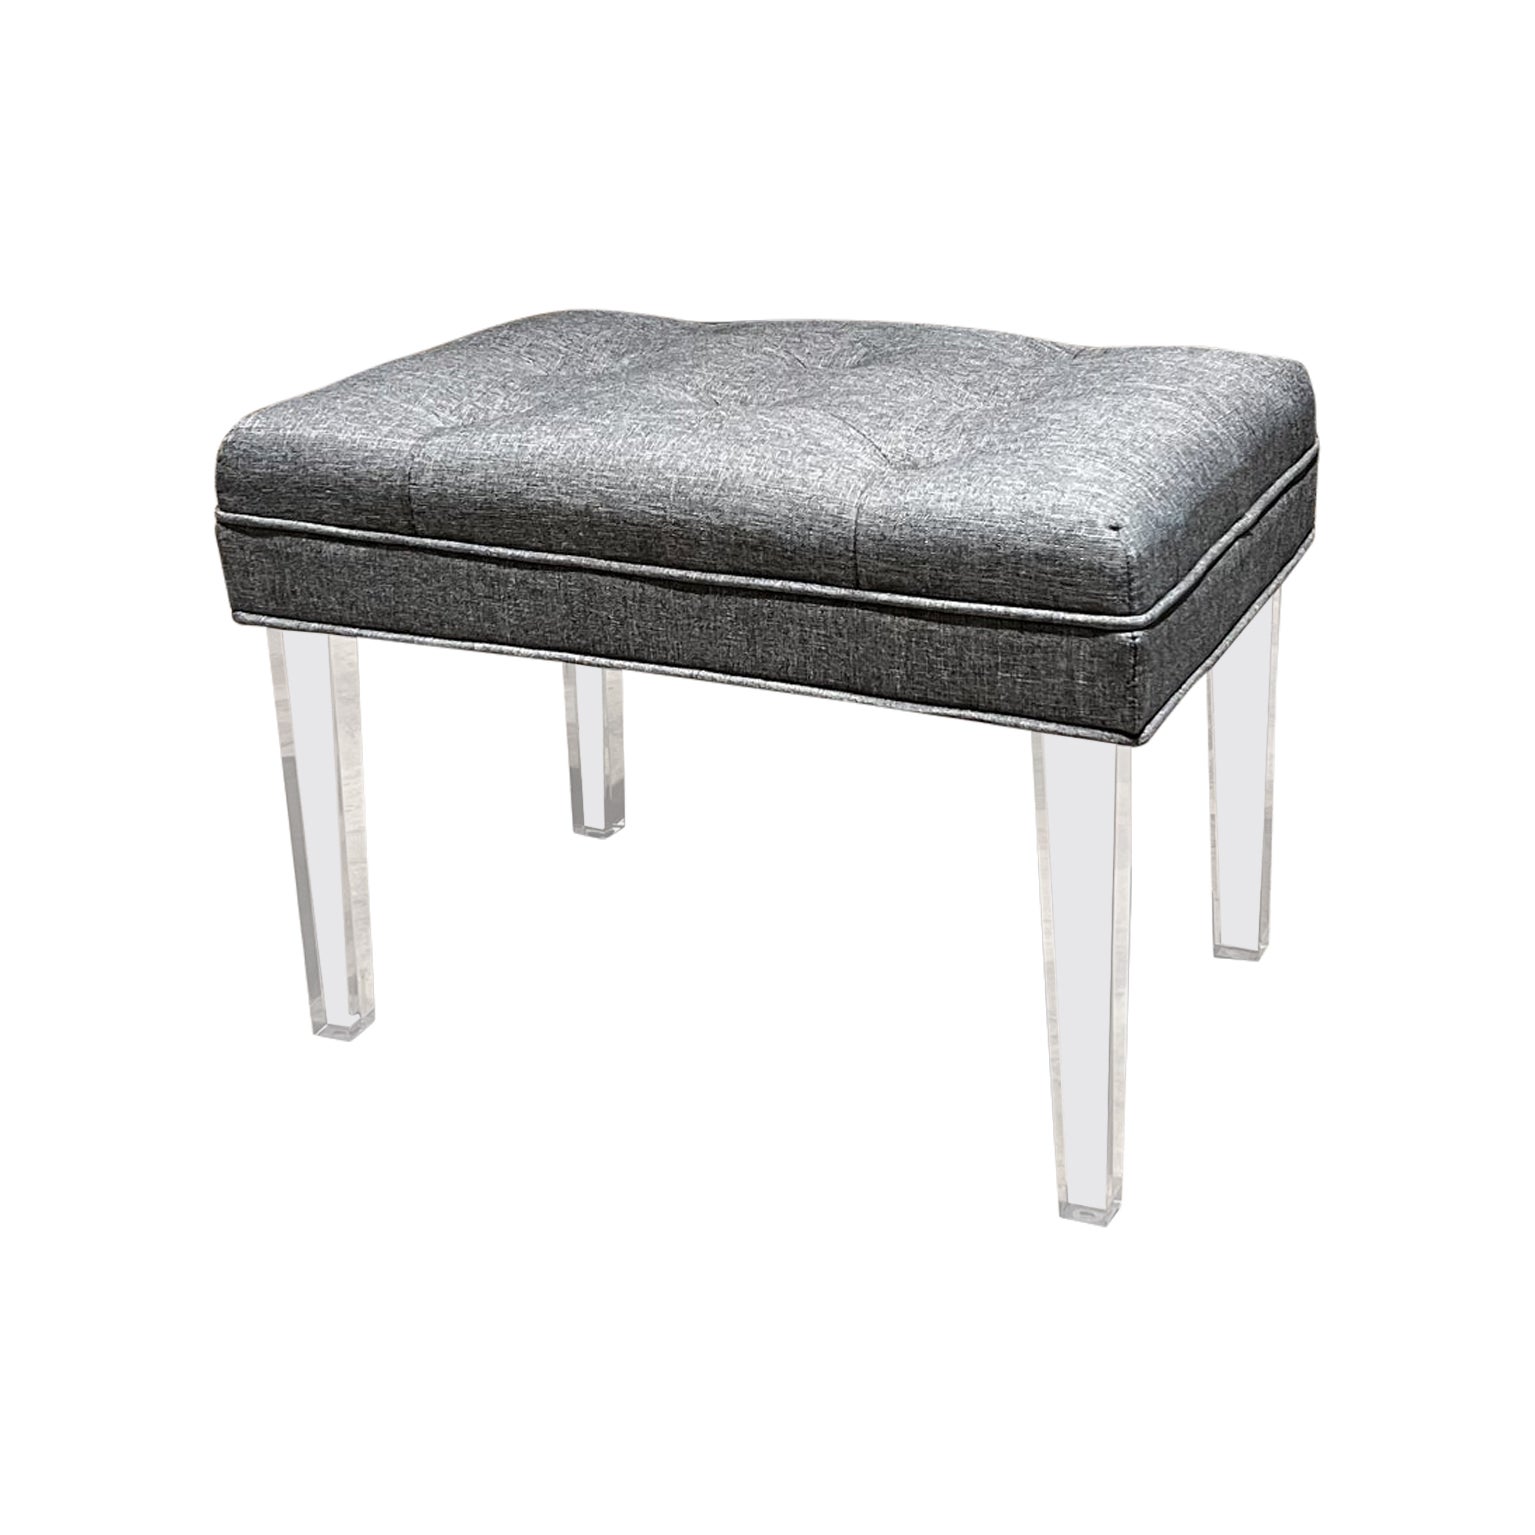 1980s Hollywood Regency Lucite Bench New Gray Tufted Fabric For Sale